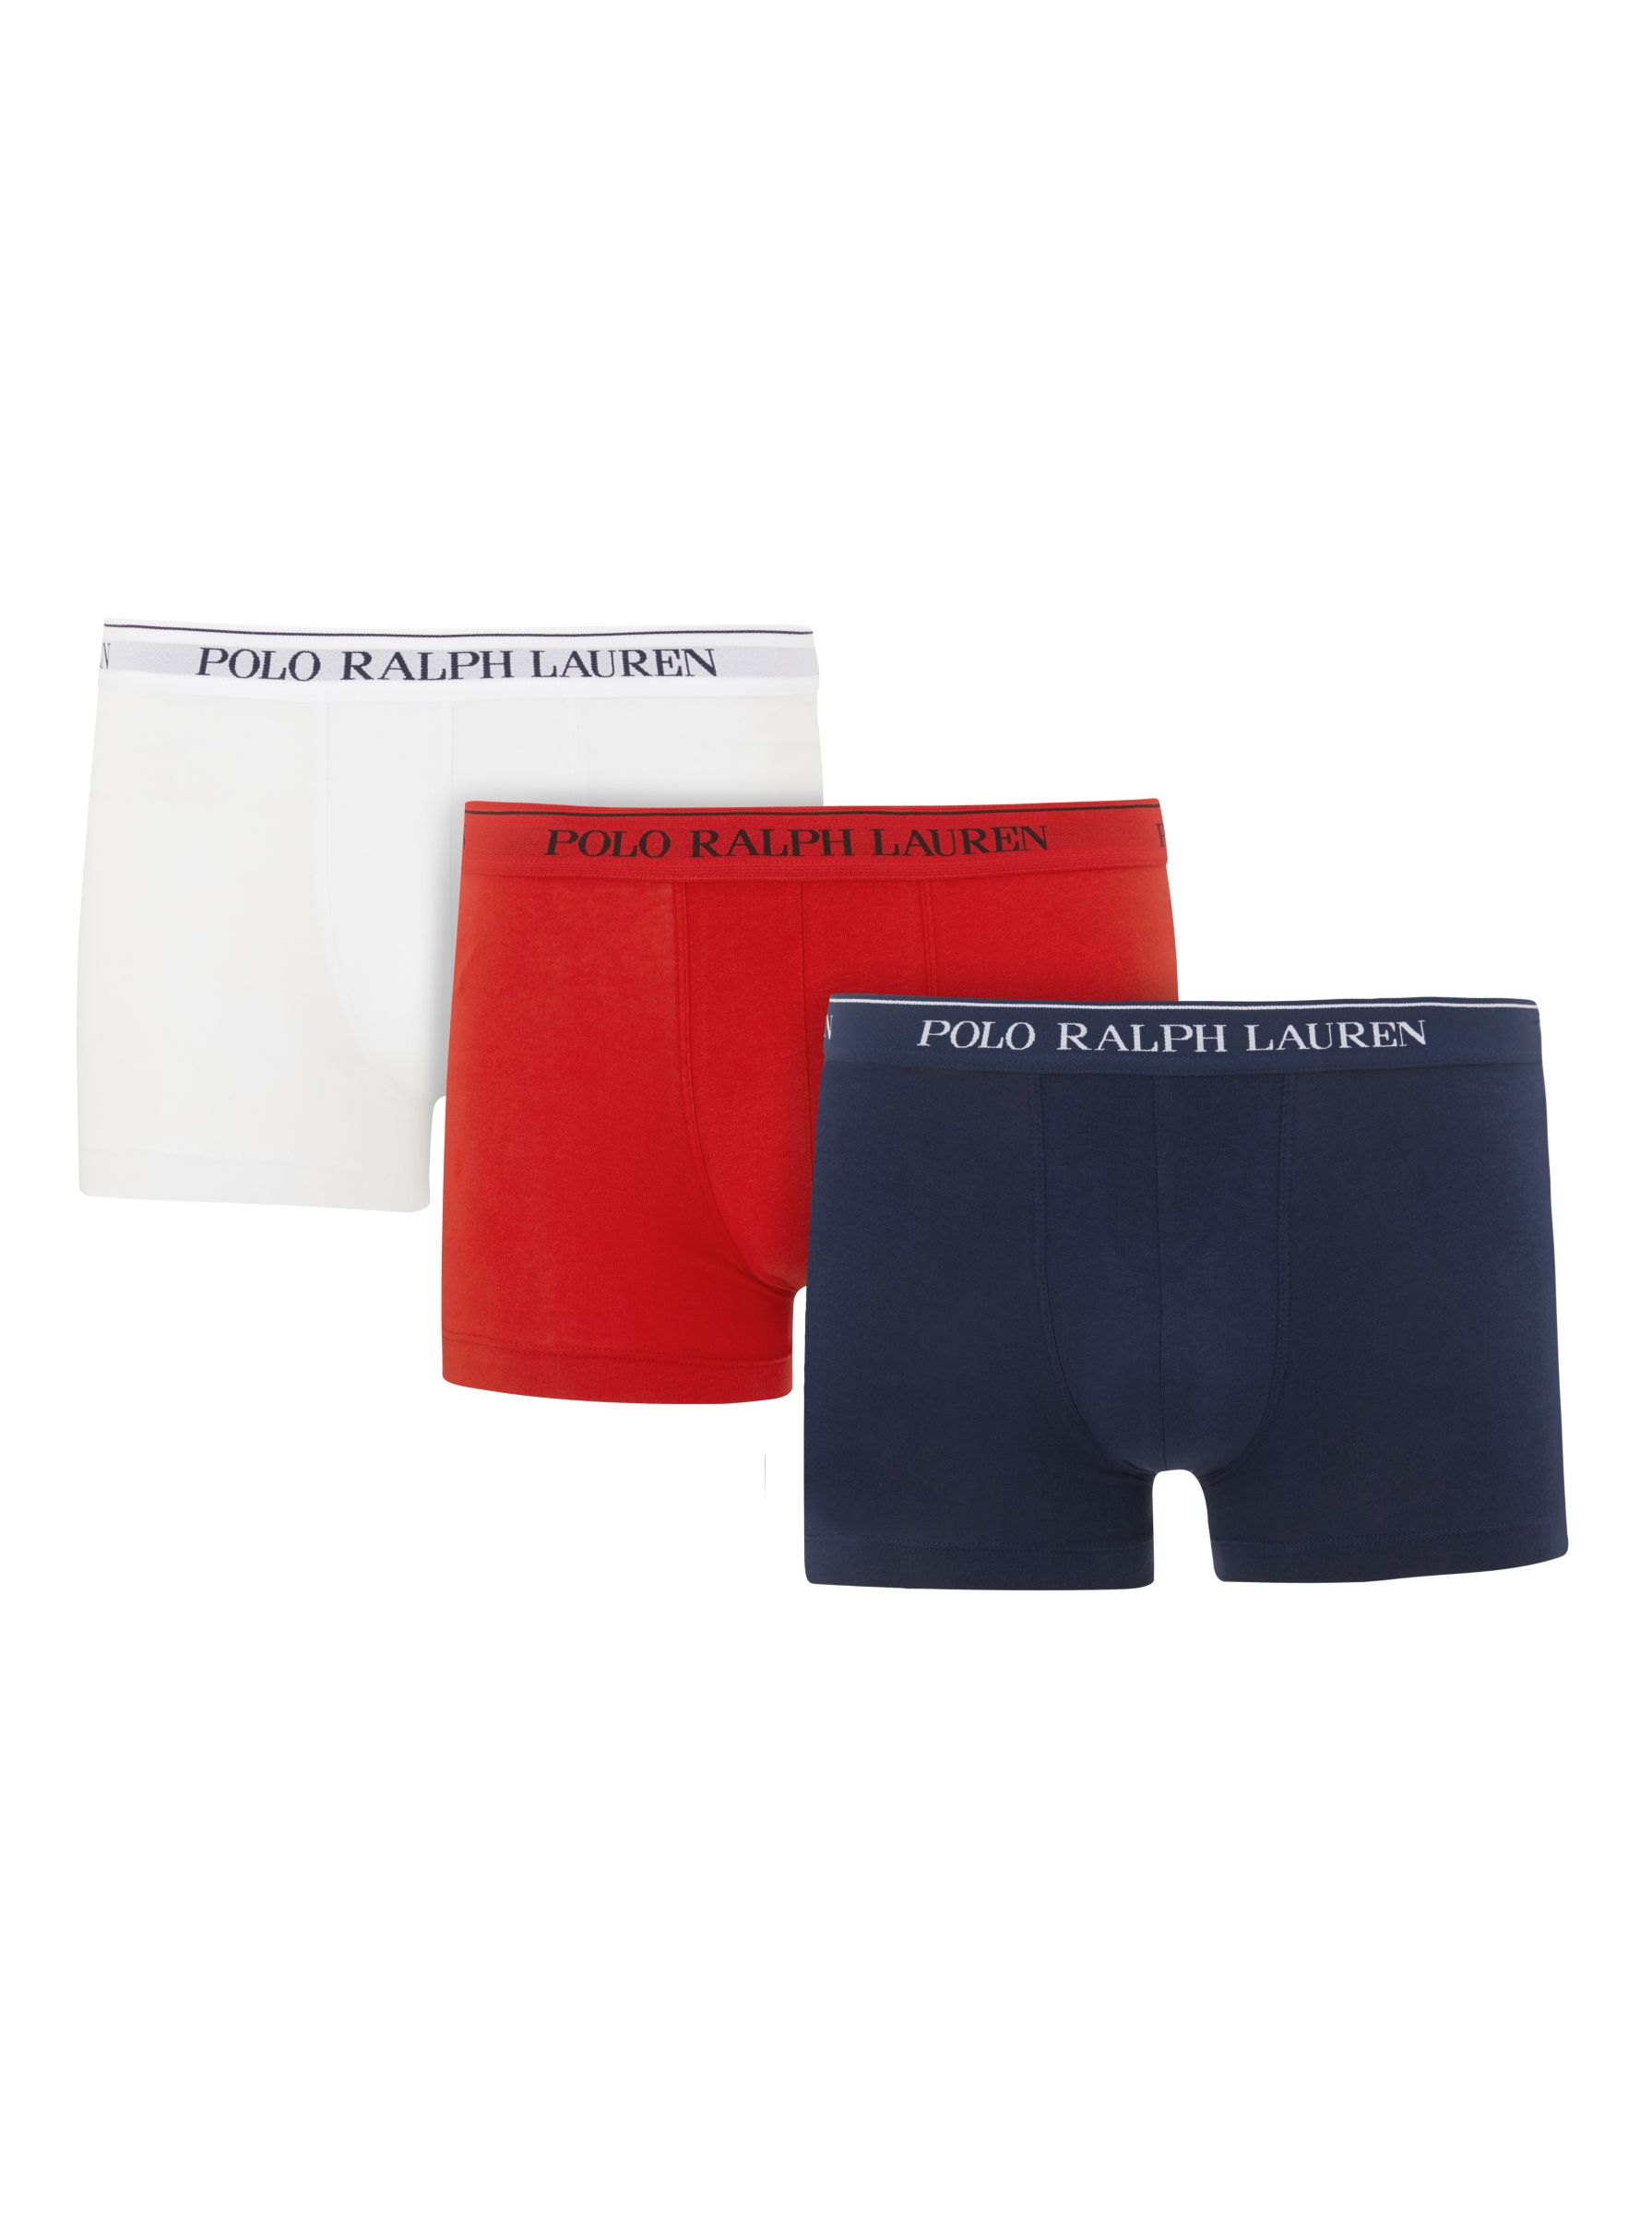 Polo Ralph Lauren Stretch Cotton Trunks, Pack of 3, Blue/Red/White at John  Lewis & Partners